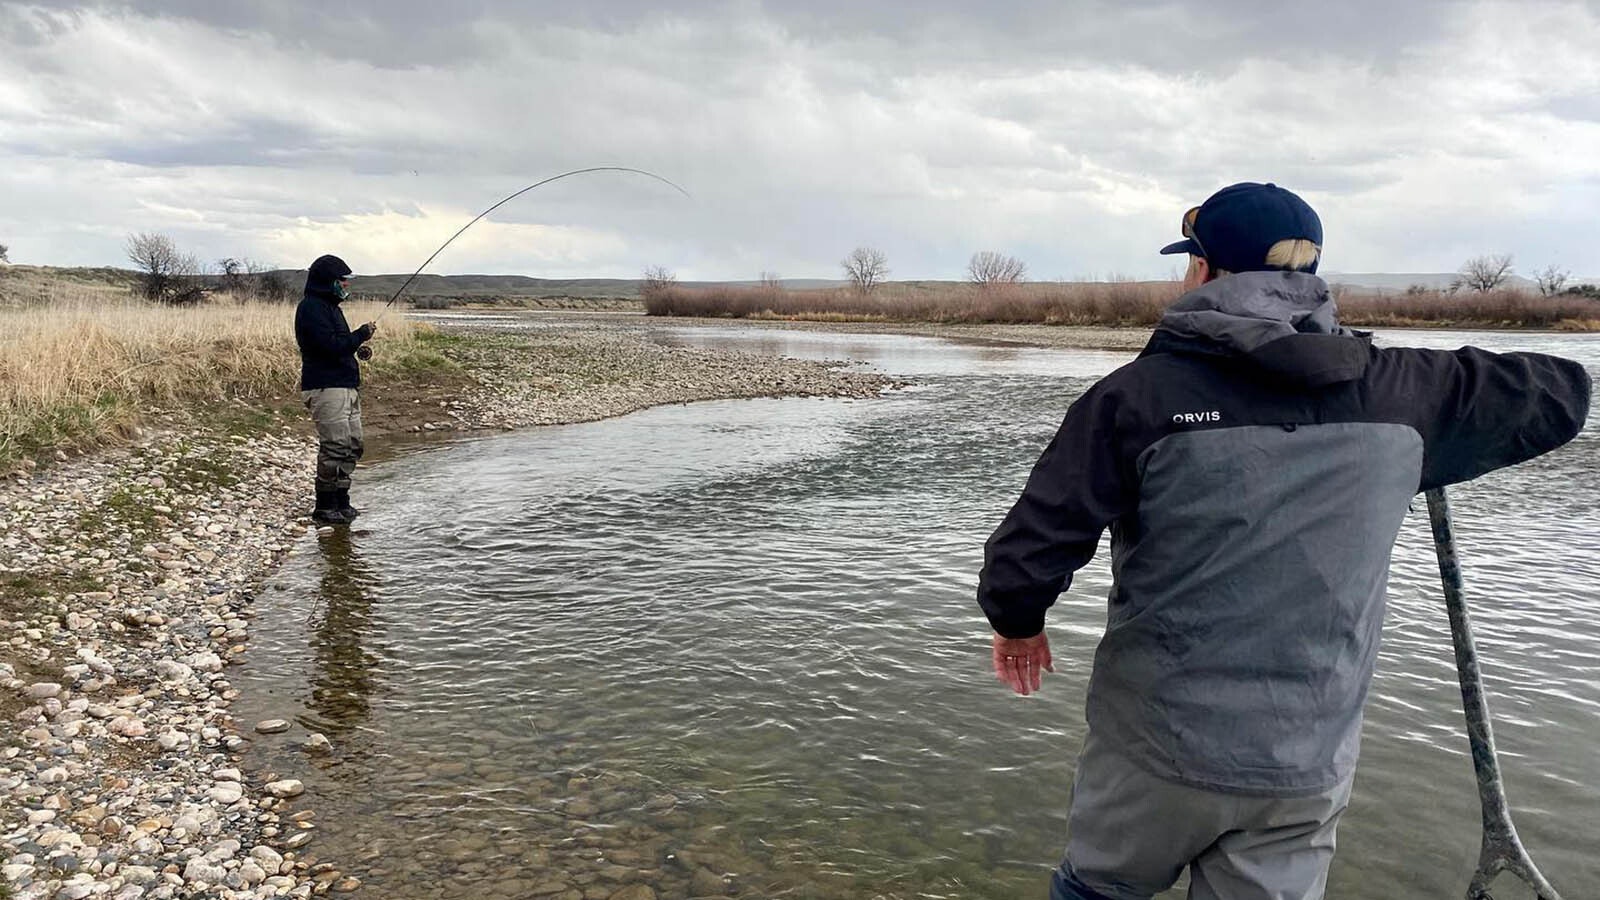 The North Platte River through Wyoming offers great fly fishing whether you're in a boat or casting from the bank.